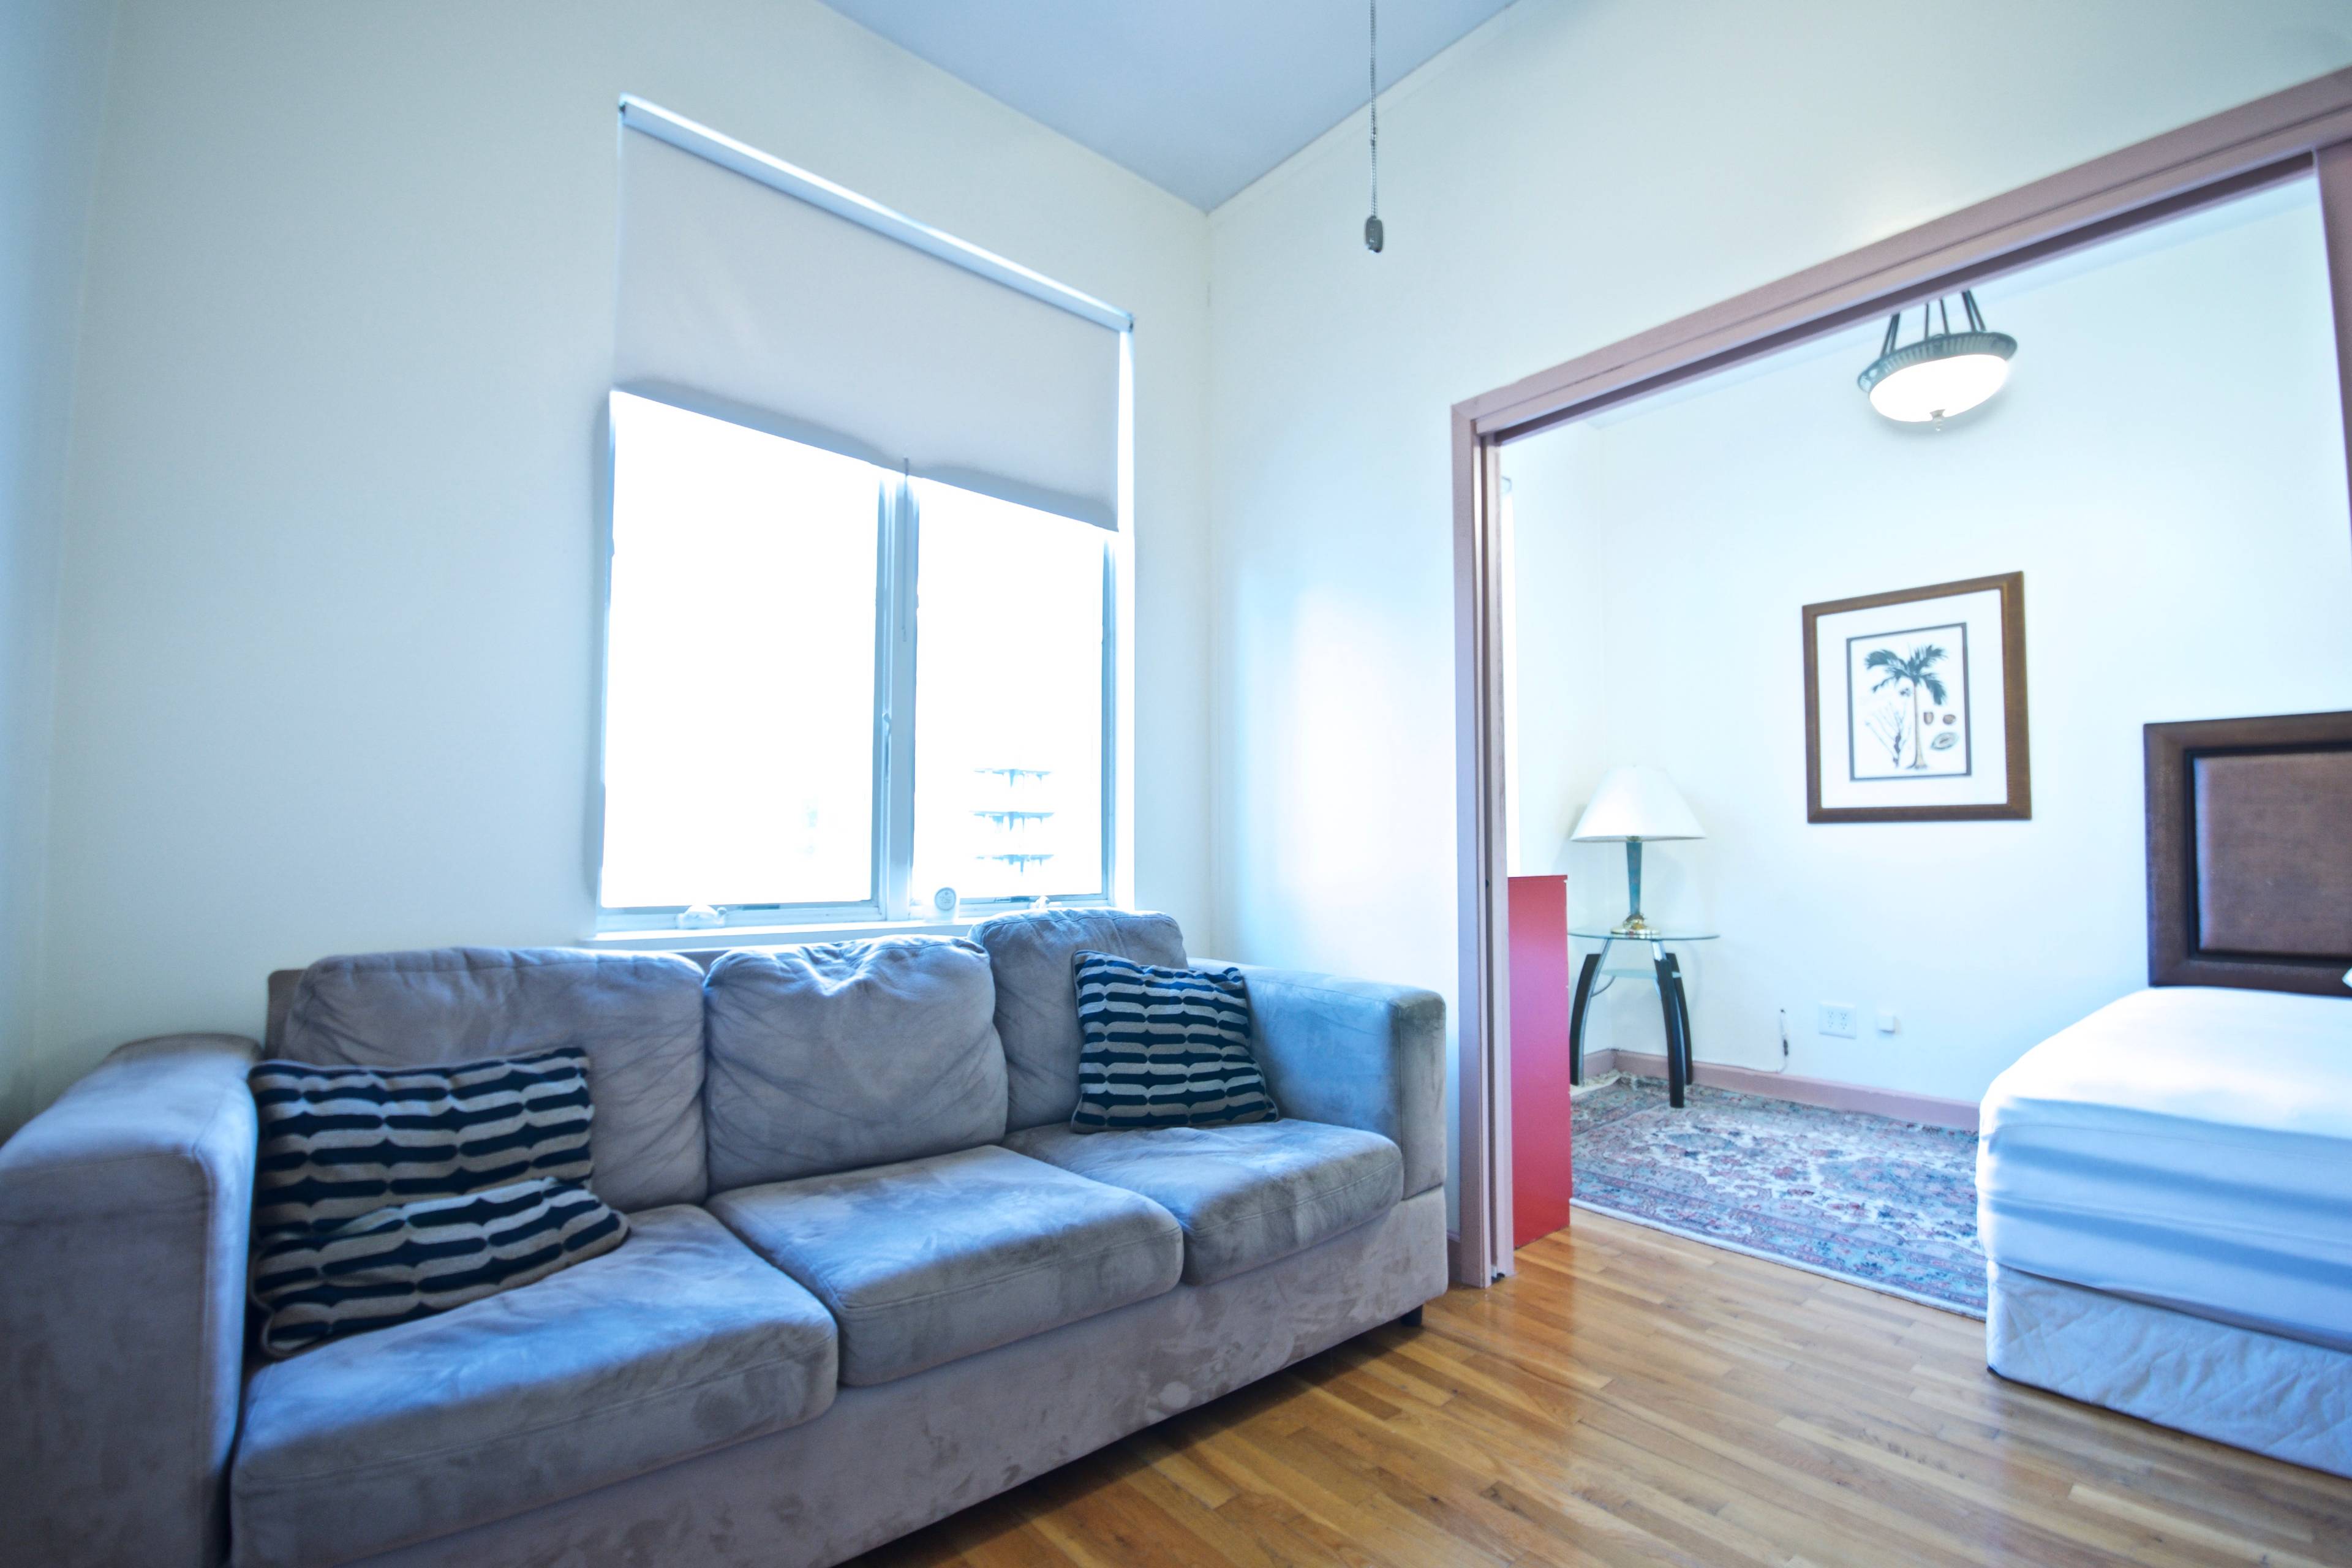 Prime Williamsburg 1 Bedroom with AC and Premium Kitchen Appliances - 1 Block to Train